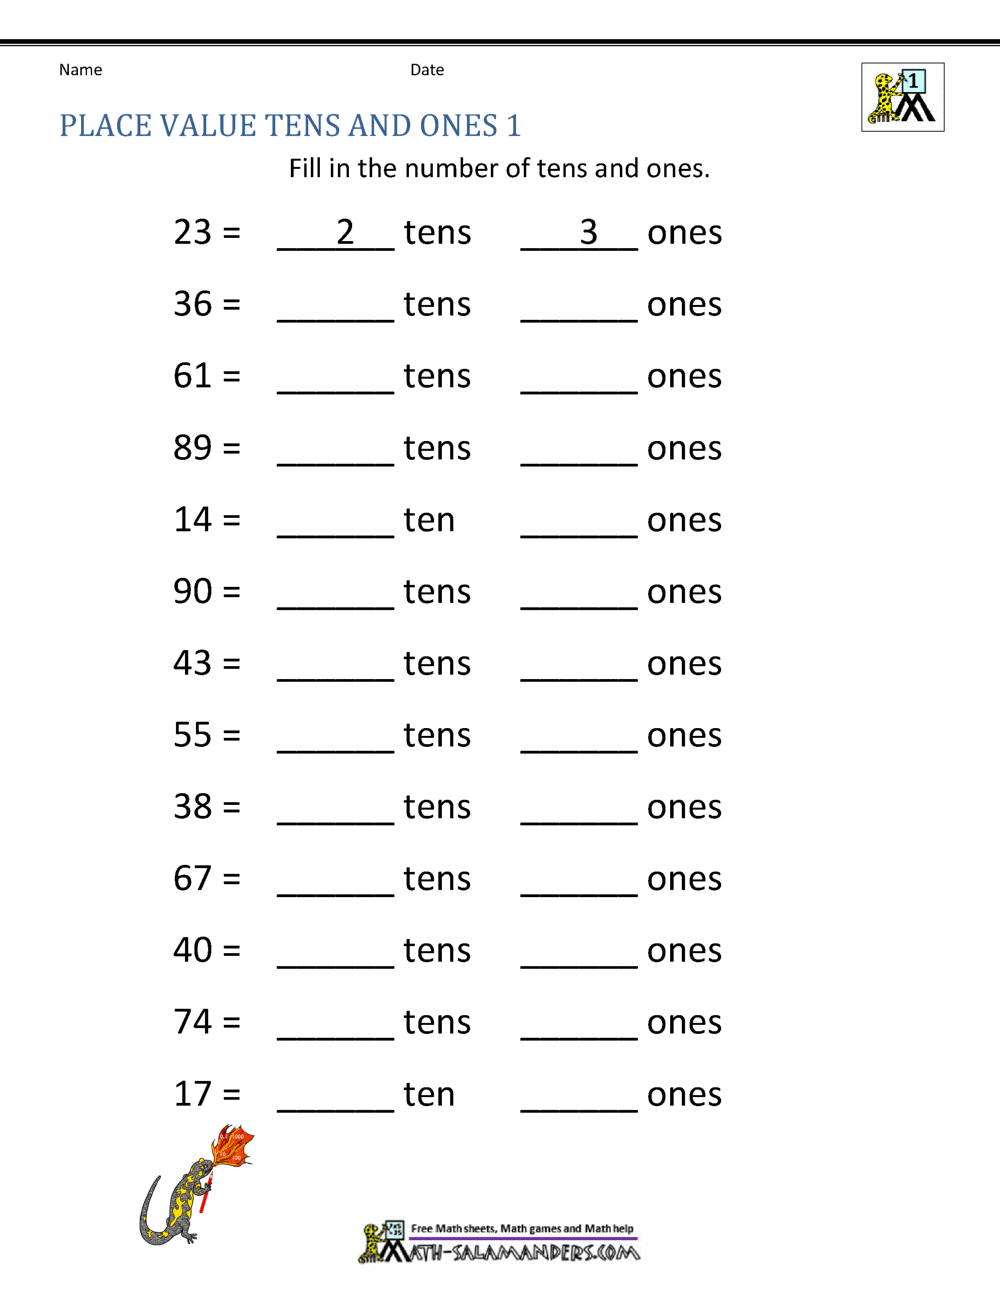 12 PRINTABLE MATH WORKSHEETS TENS AND ONES